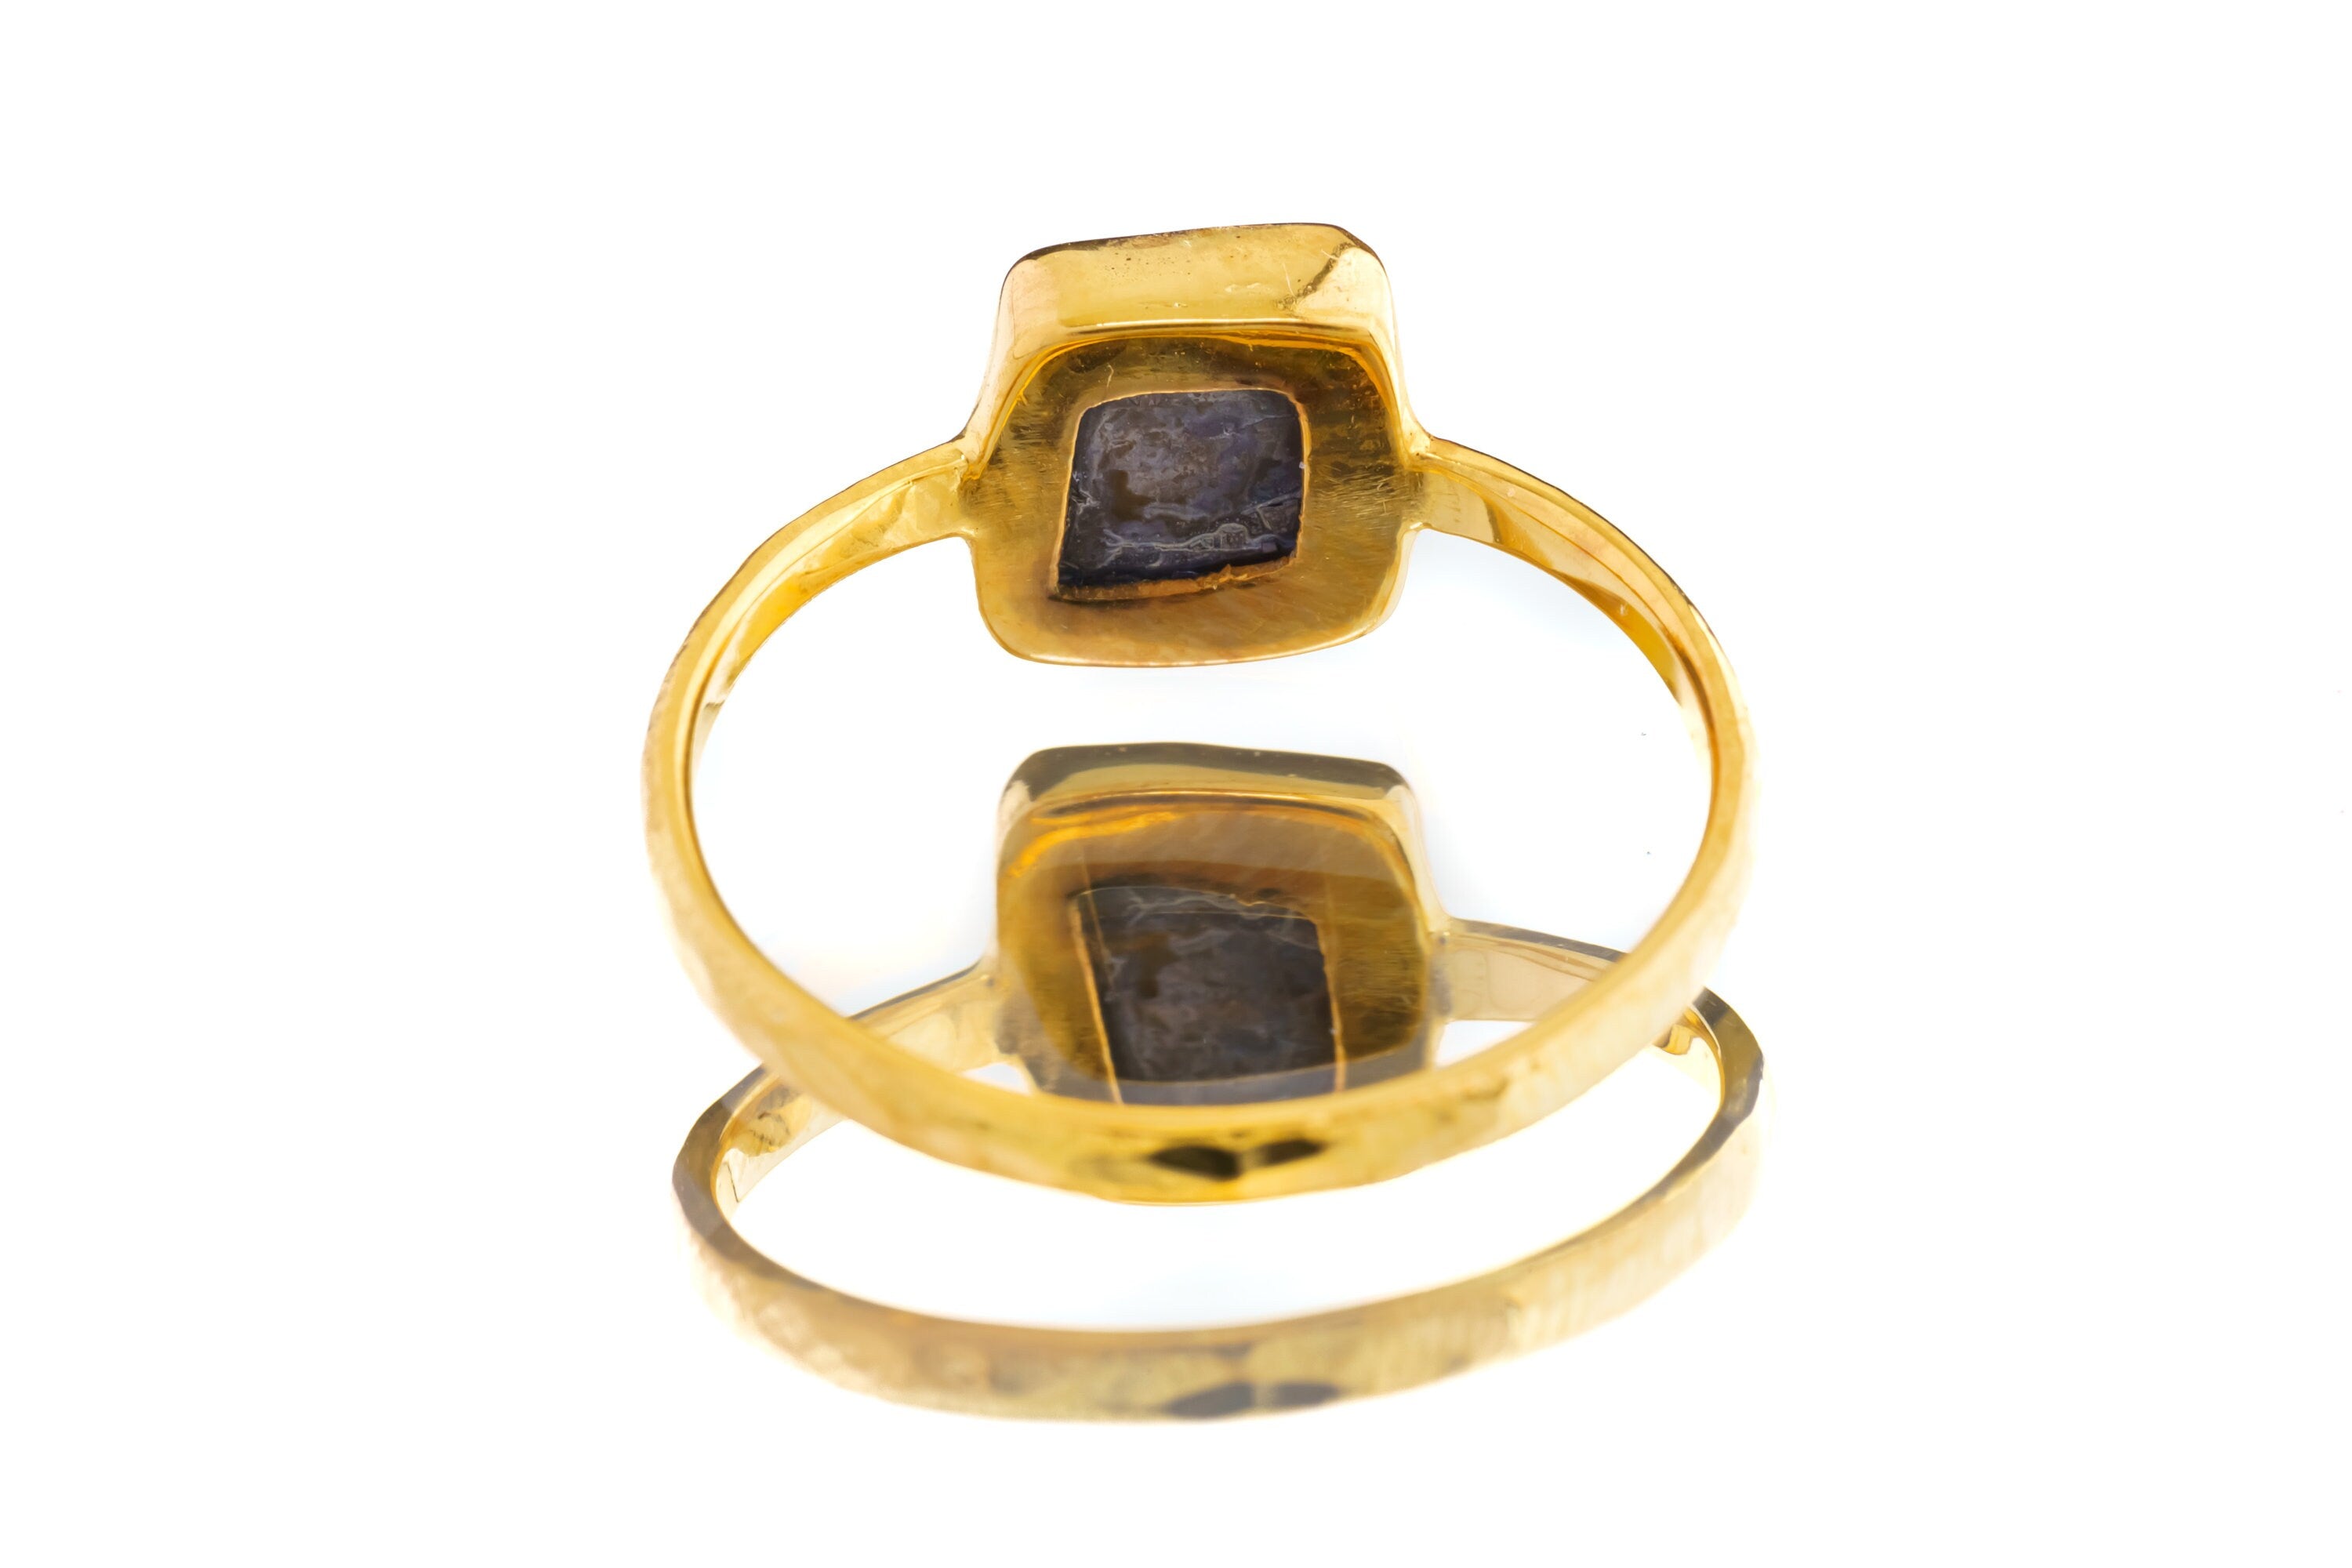 Gold Kissed Australian Cubic Pyrite - Stack Crystal Ring - Size 6 US - Gold Plated 925 Sterling Silver - Thin Band Hammer Textured